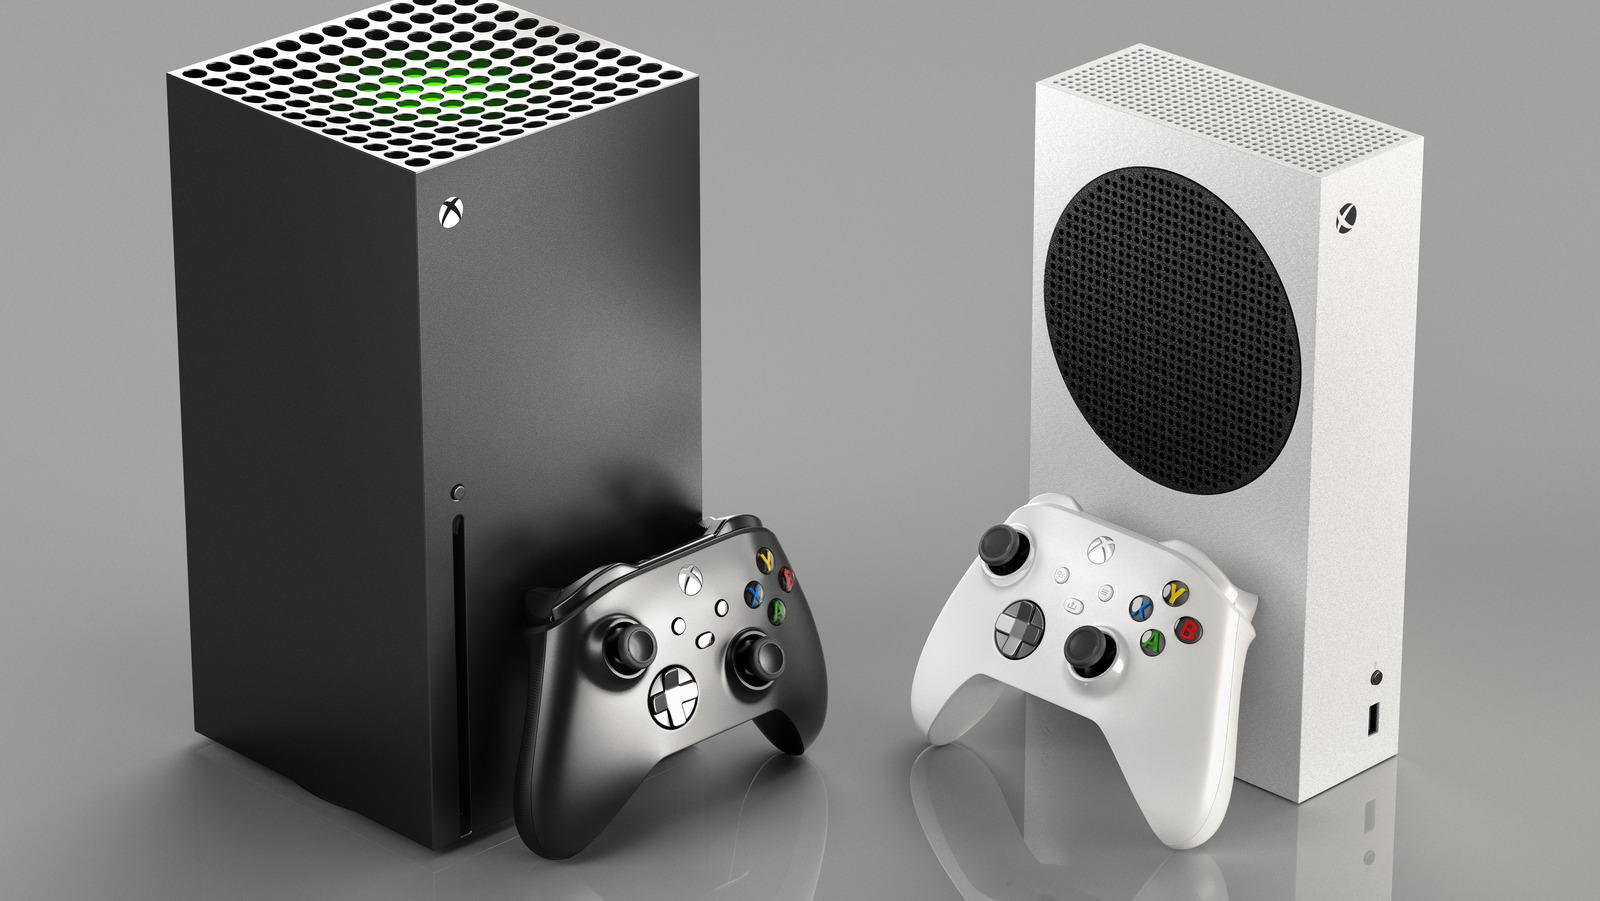 Redfall adds Performance Mode for Xbox Series consoles in new update